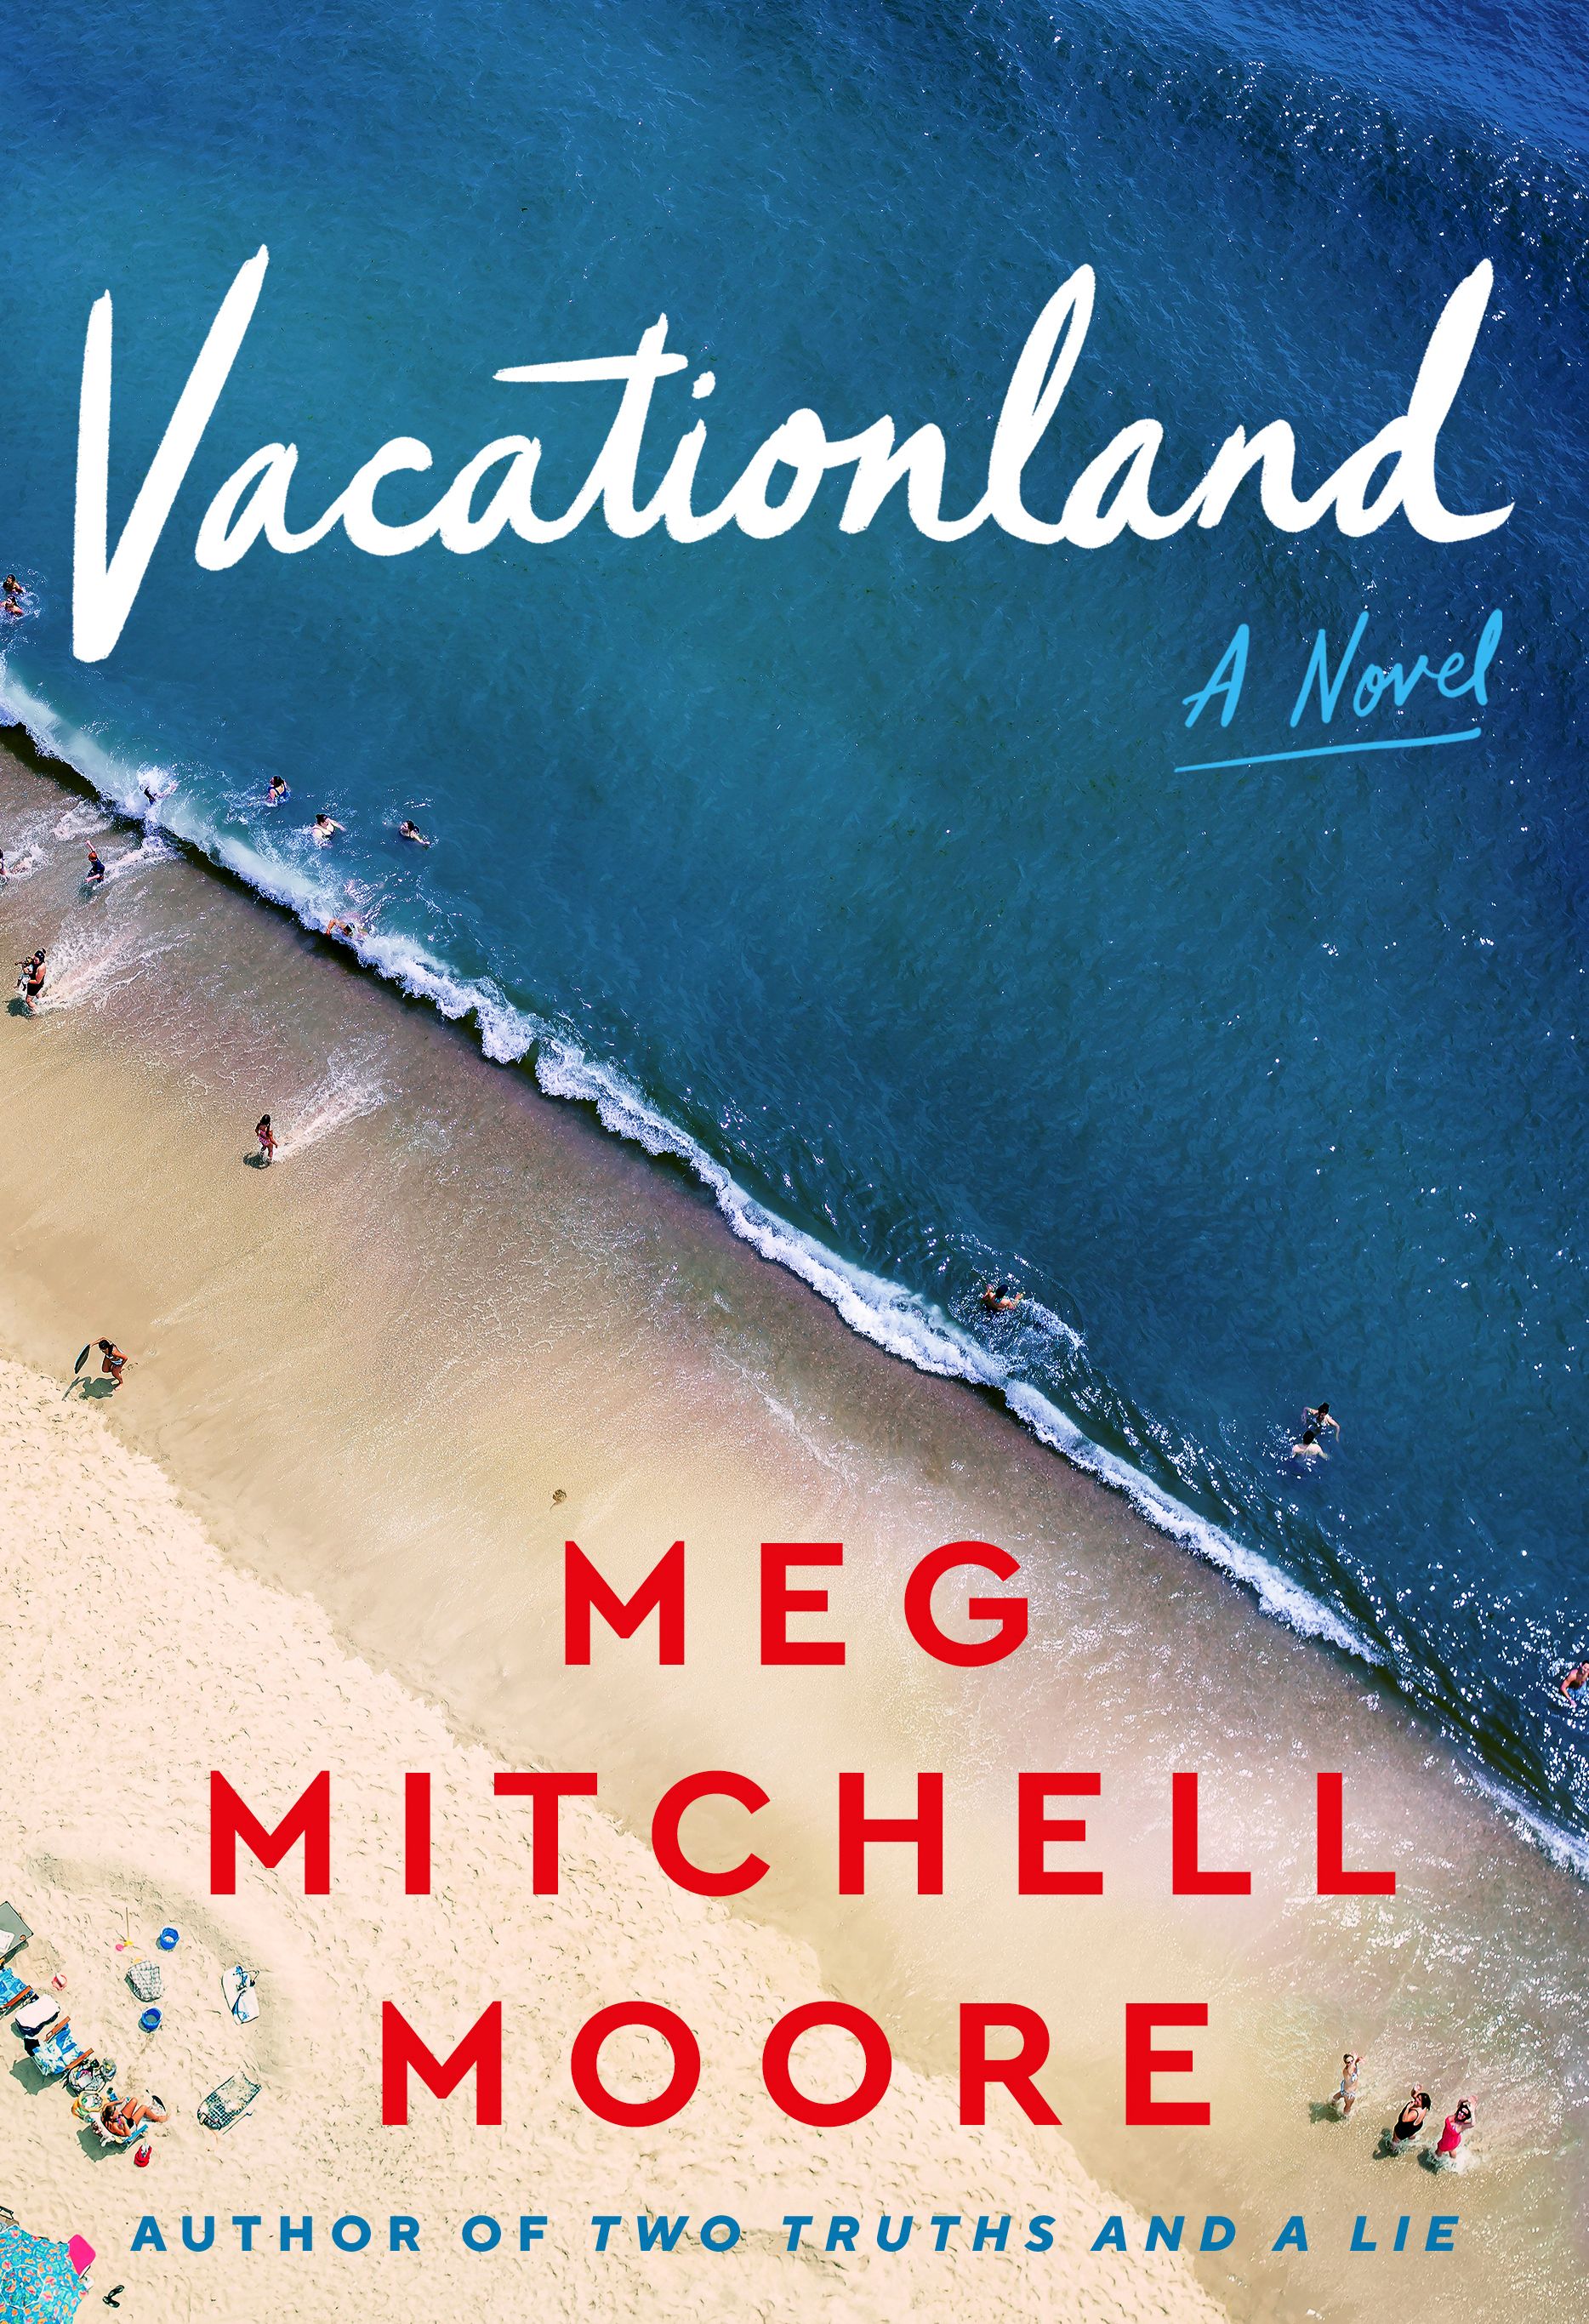 Take a trip to Meg Mitchell Moore's 'Vacationland' for a family